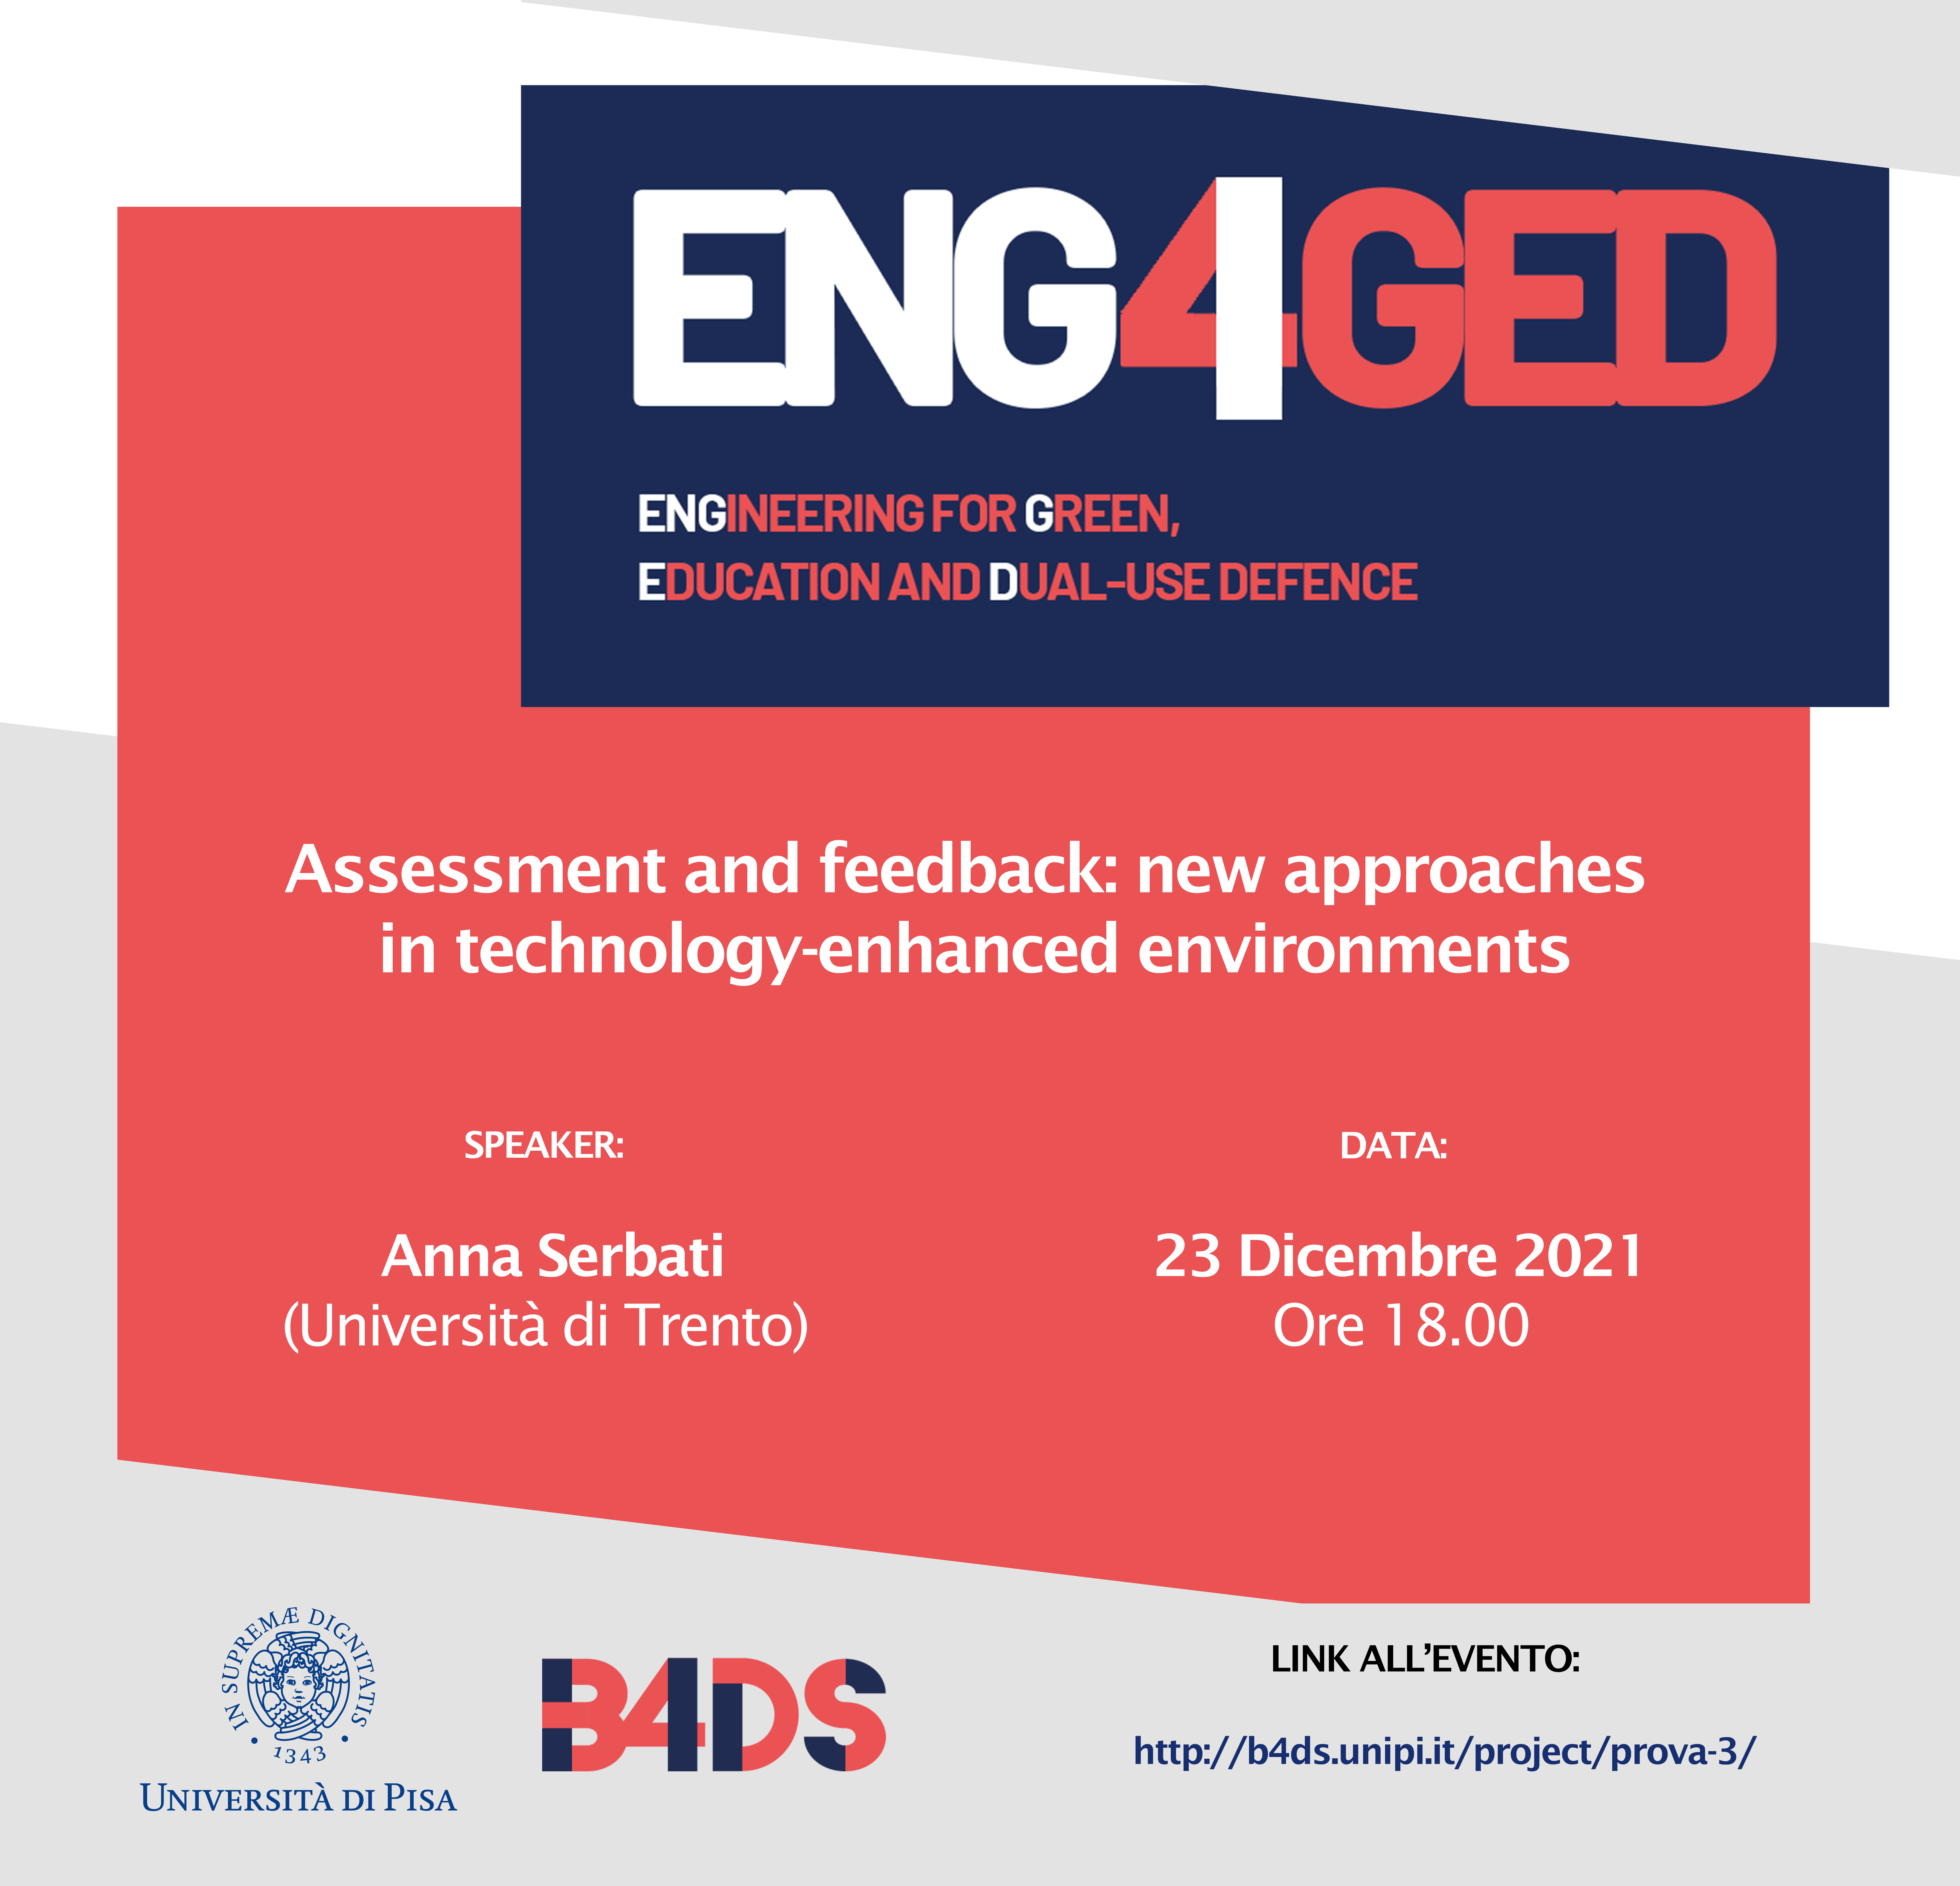 Assessment and feedback: new approaches in technology-enhanced environments